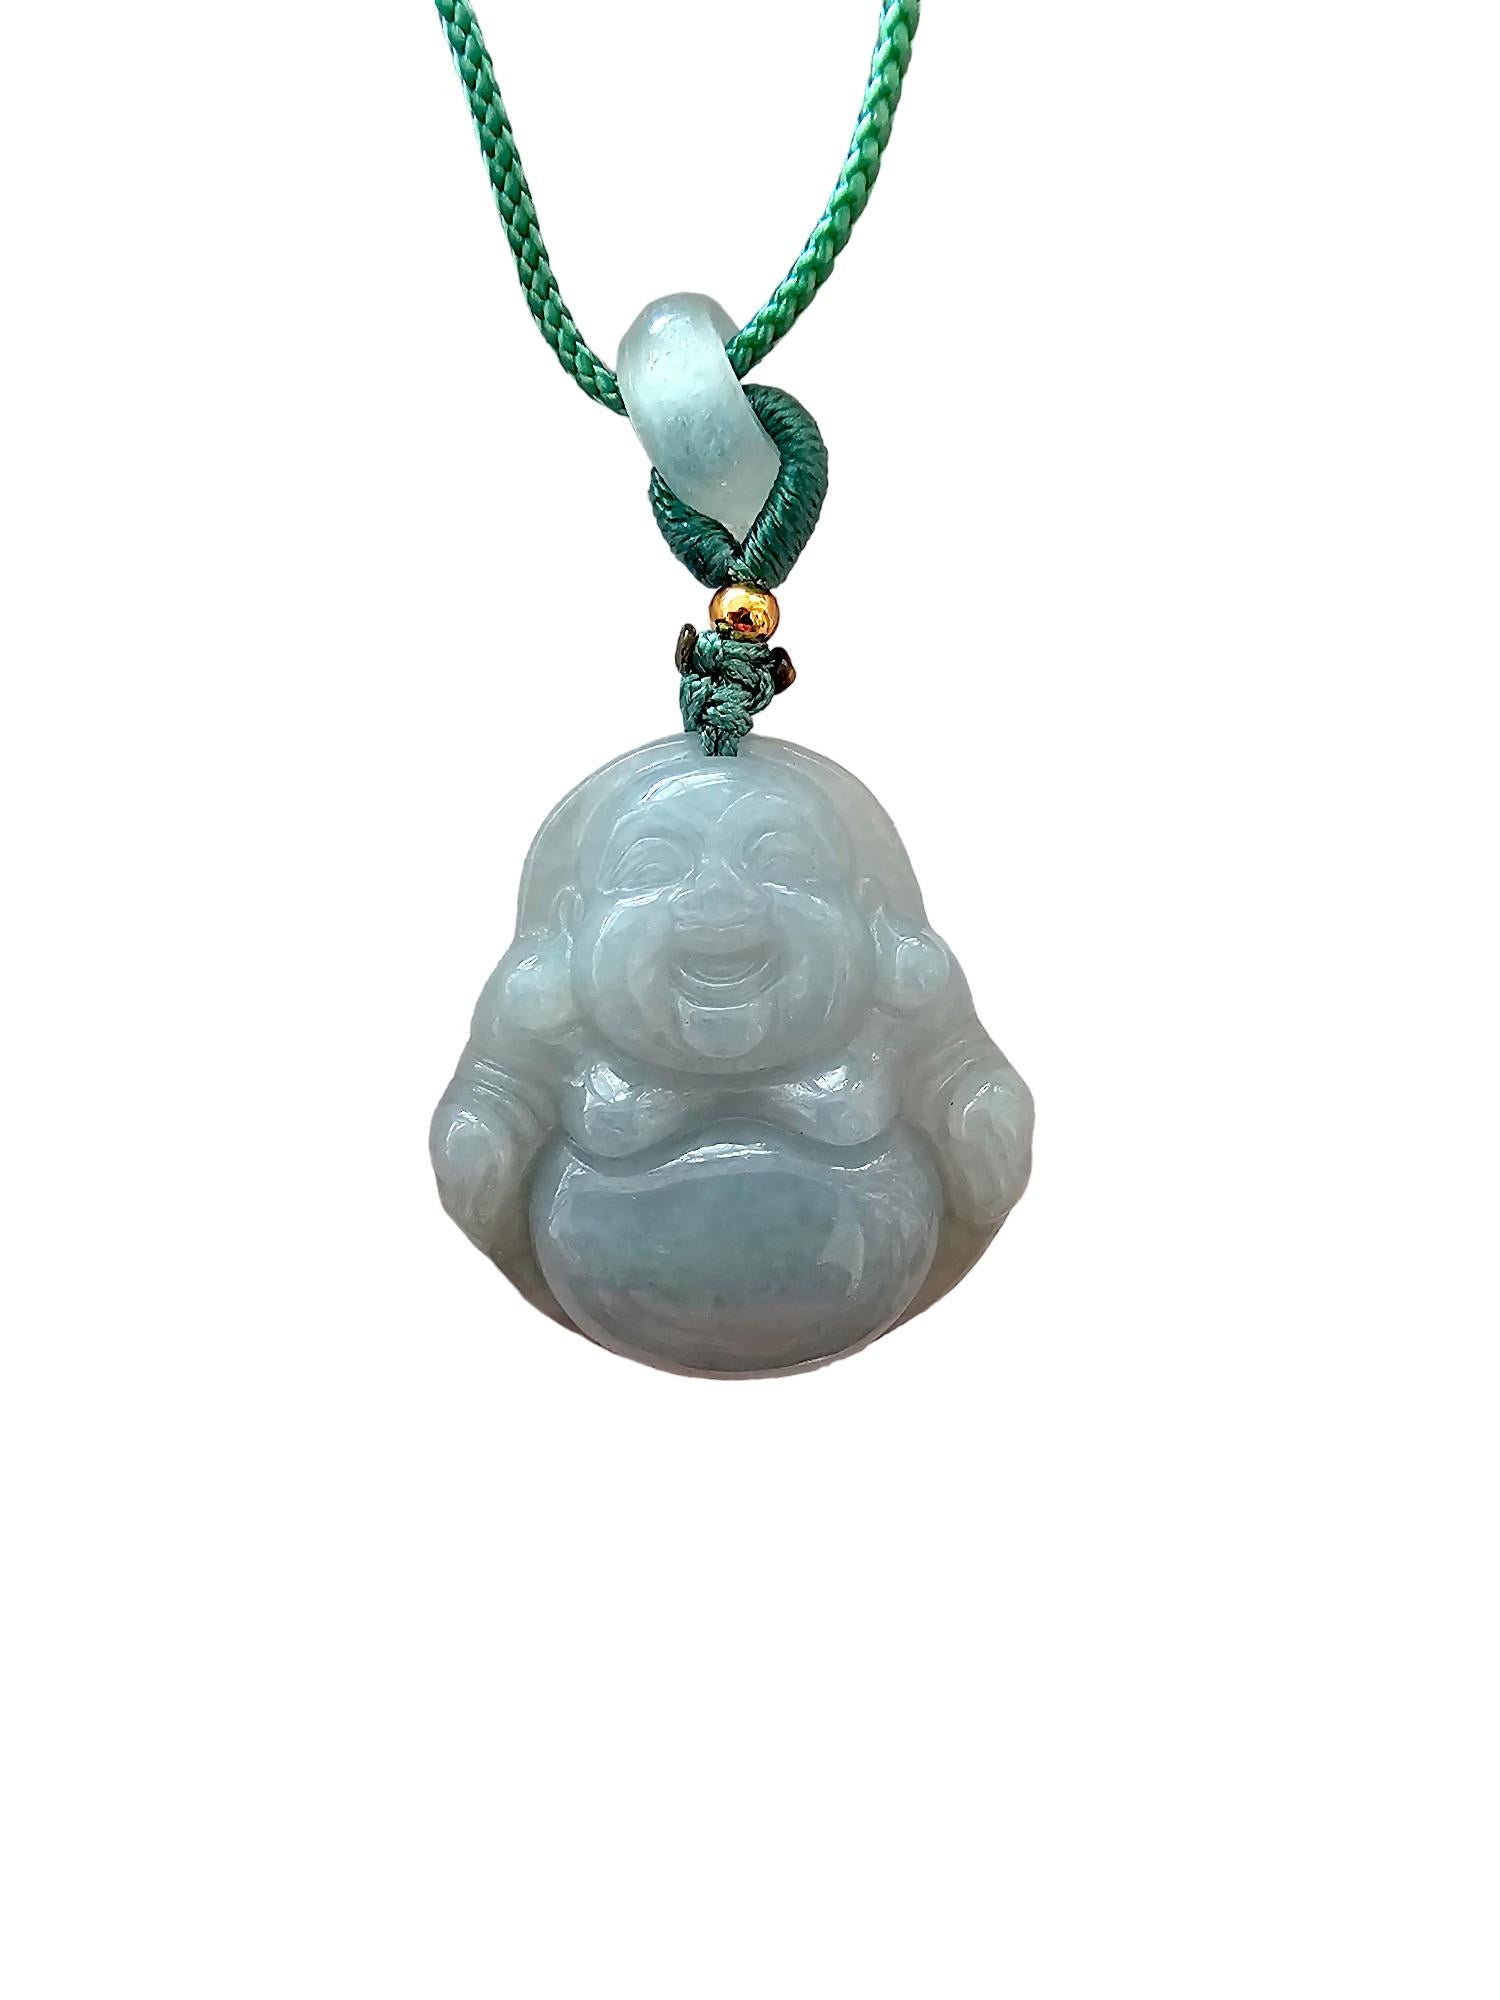 Sapporo Burmese A-Jadeite Big Laughing Buddha Pendant Necklace with FYORO String For Sale 2